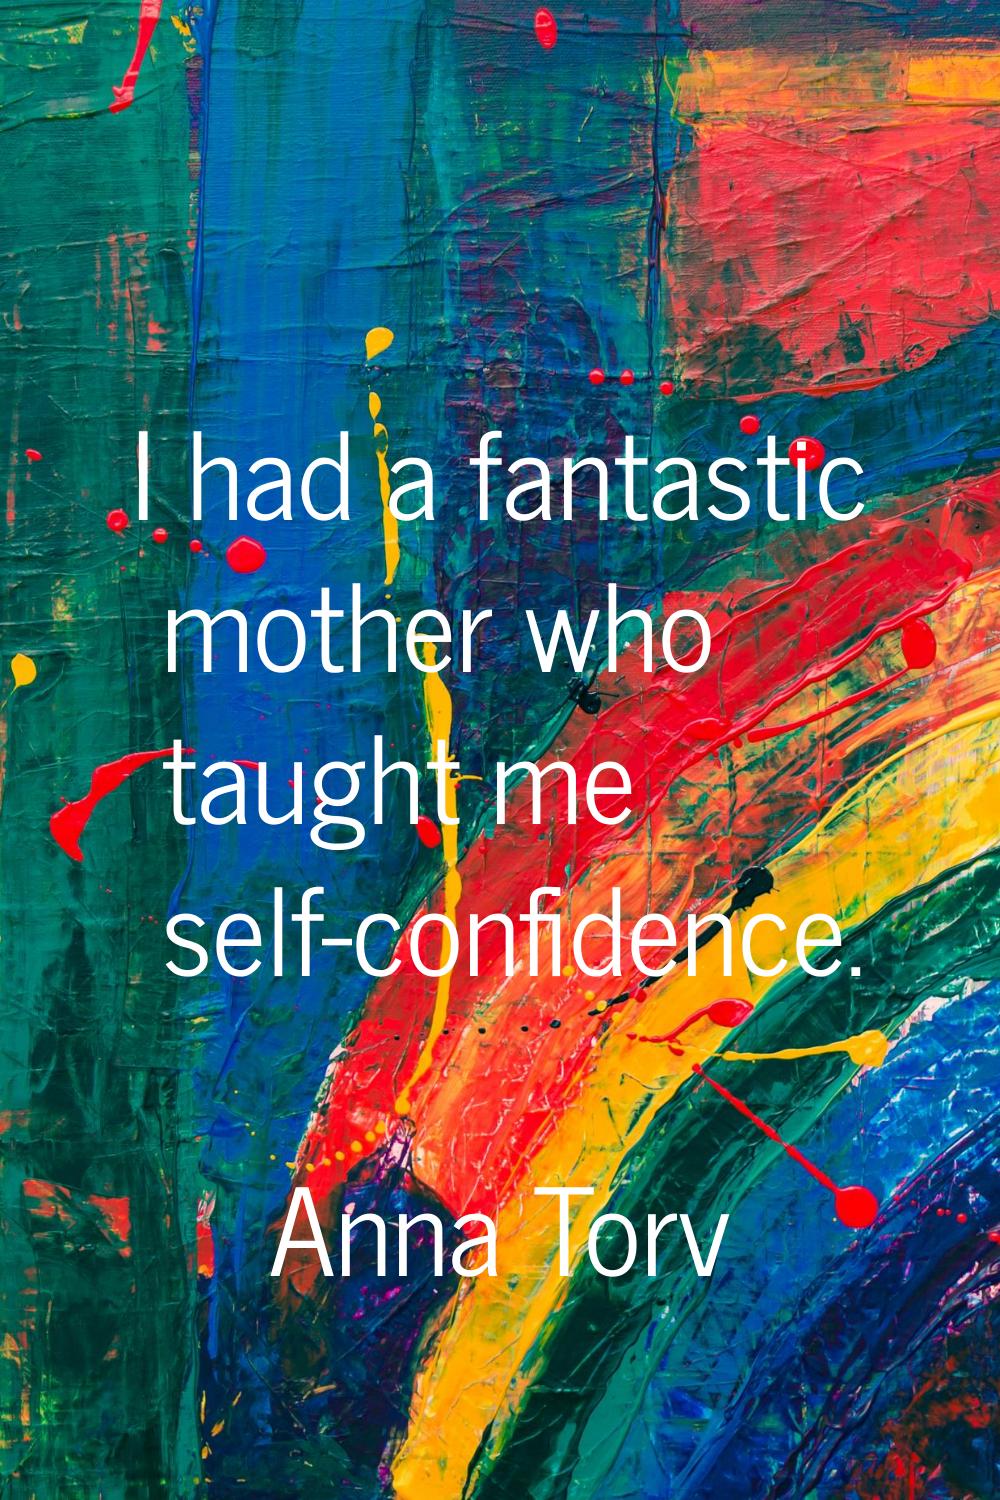 I had a fantastic mother who taught me self-confidence.